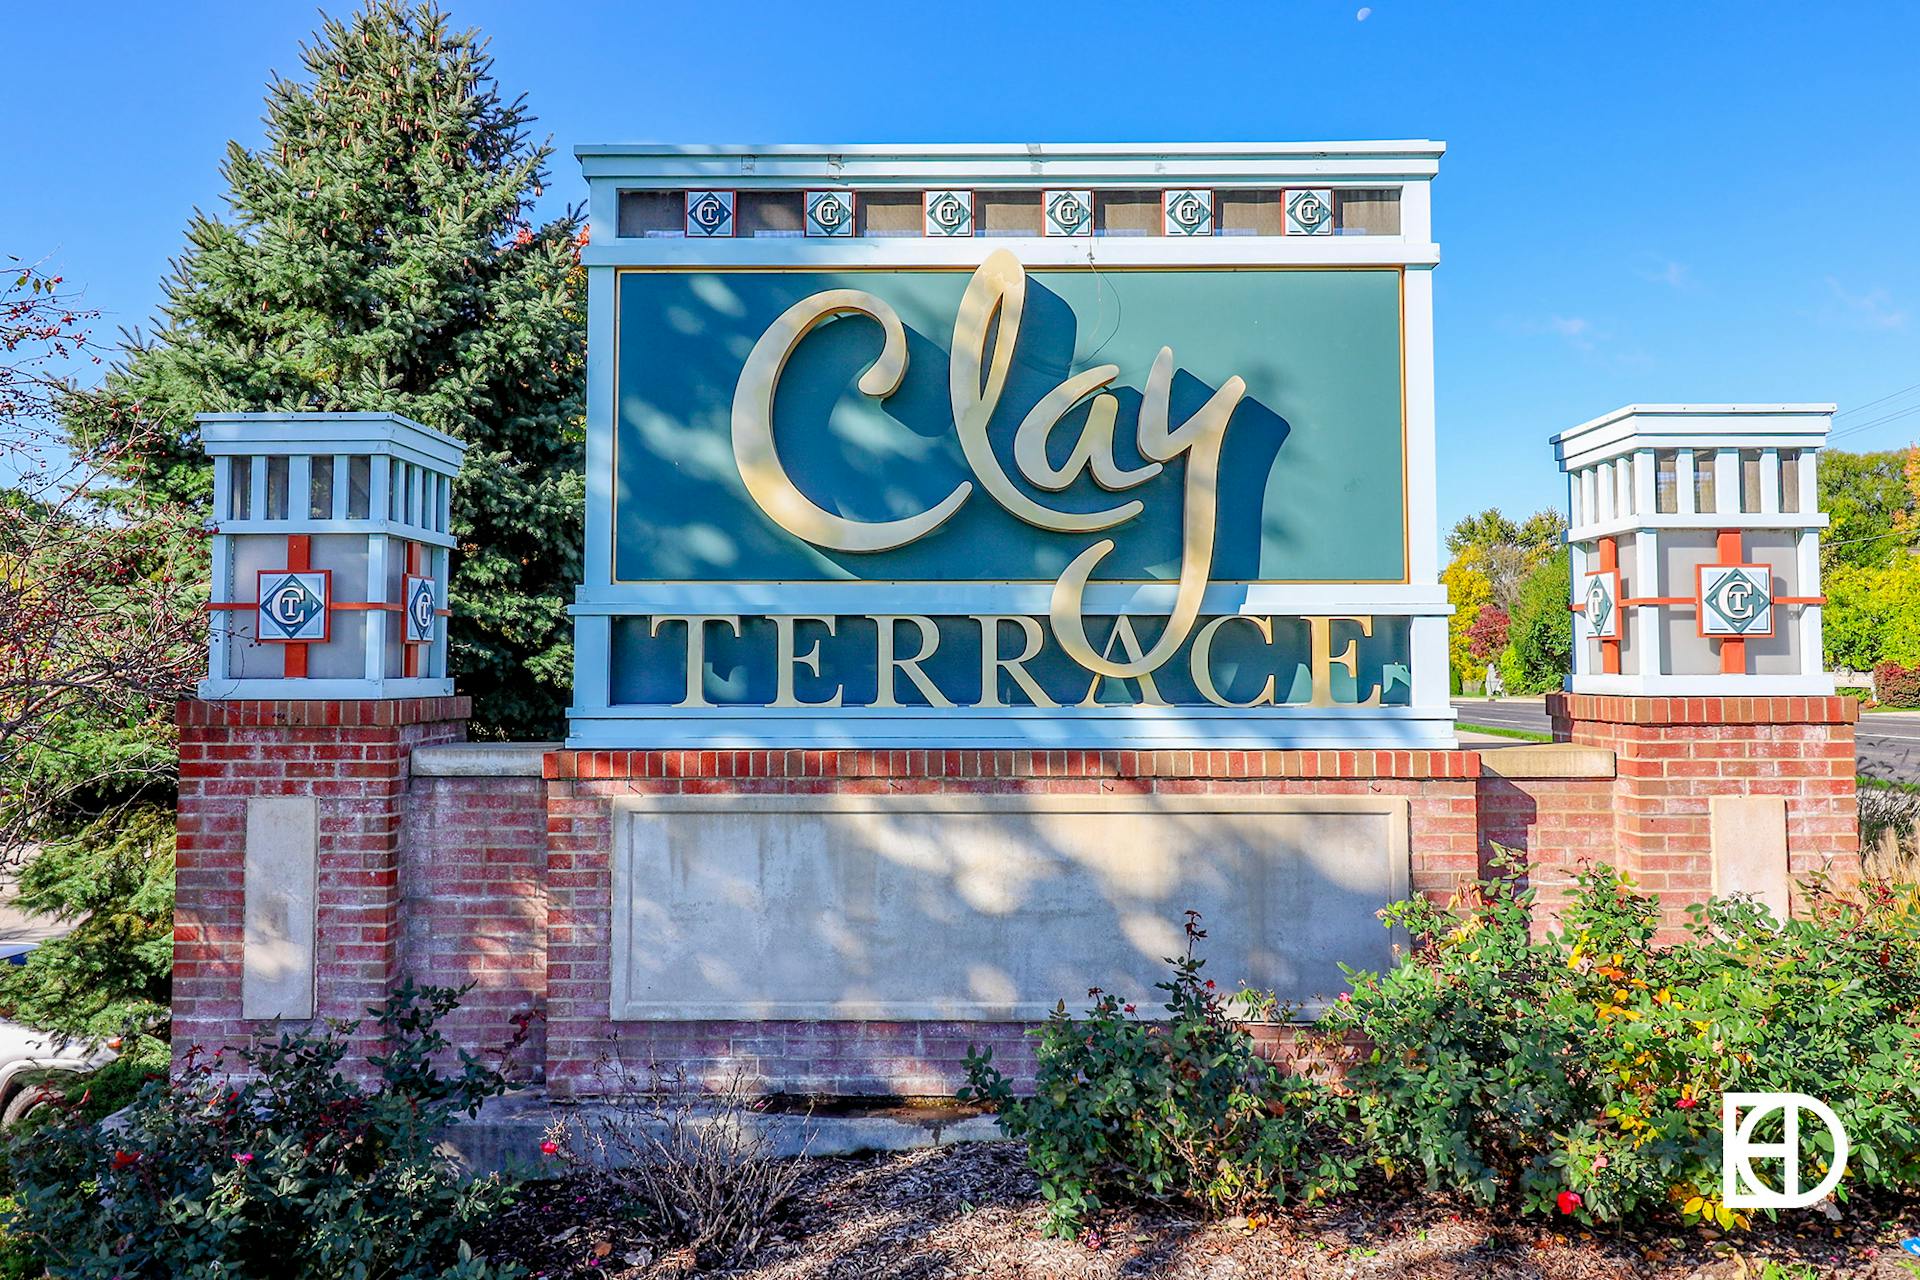 Entrance Sign to Clay Terrace Mall